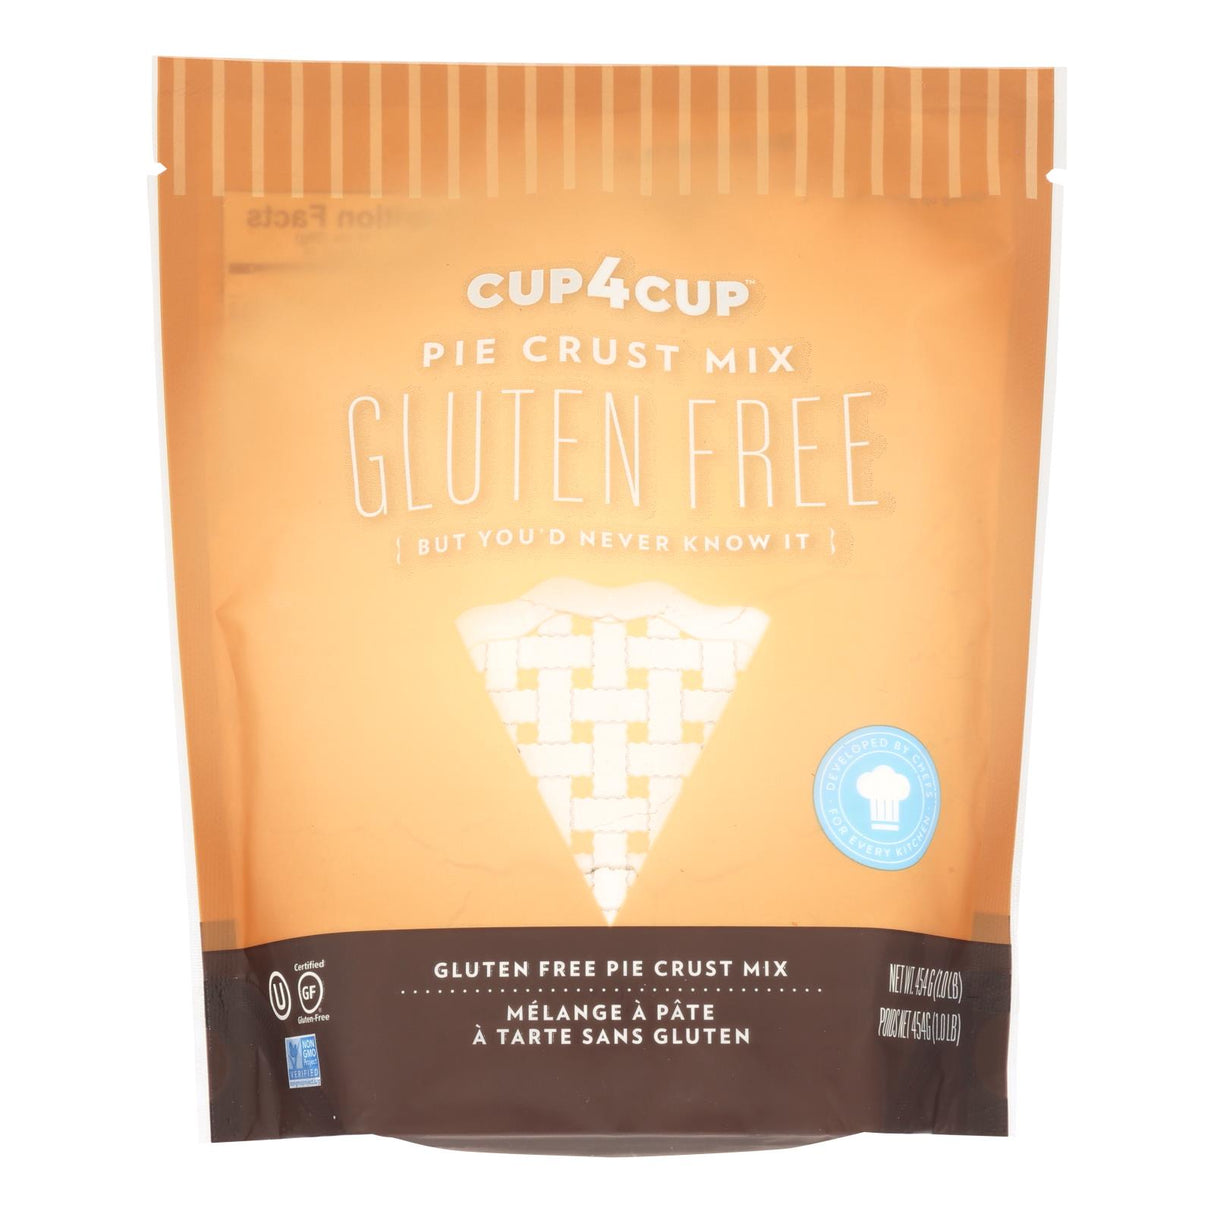 Cup 4 Cup Gluten-Free Pie Crust Mix (Pack of 6 - 1 lb. Each) - Cozy Farm 